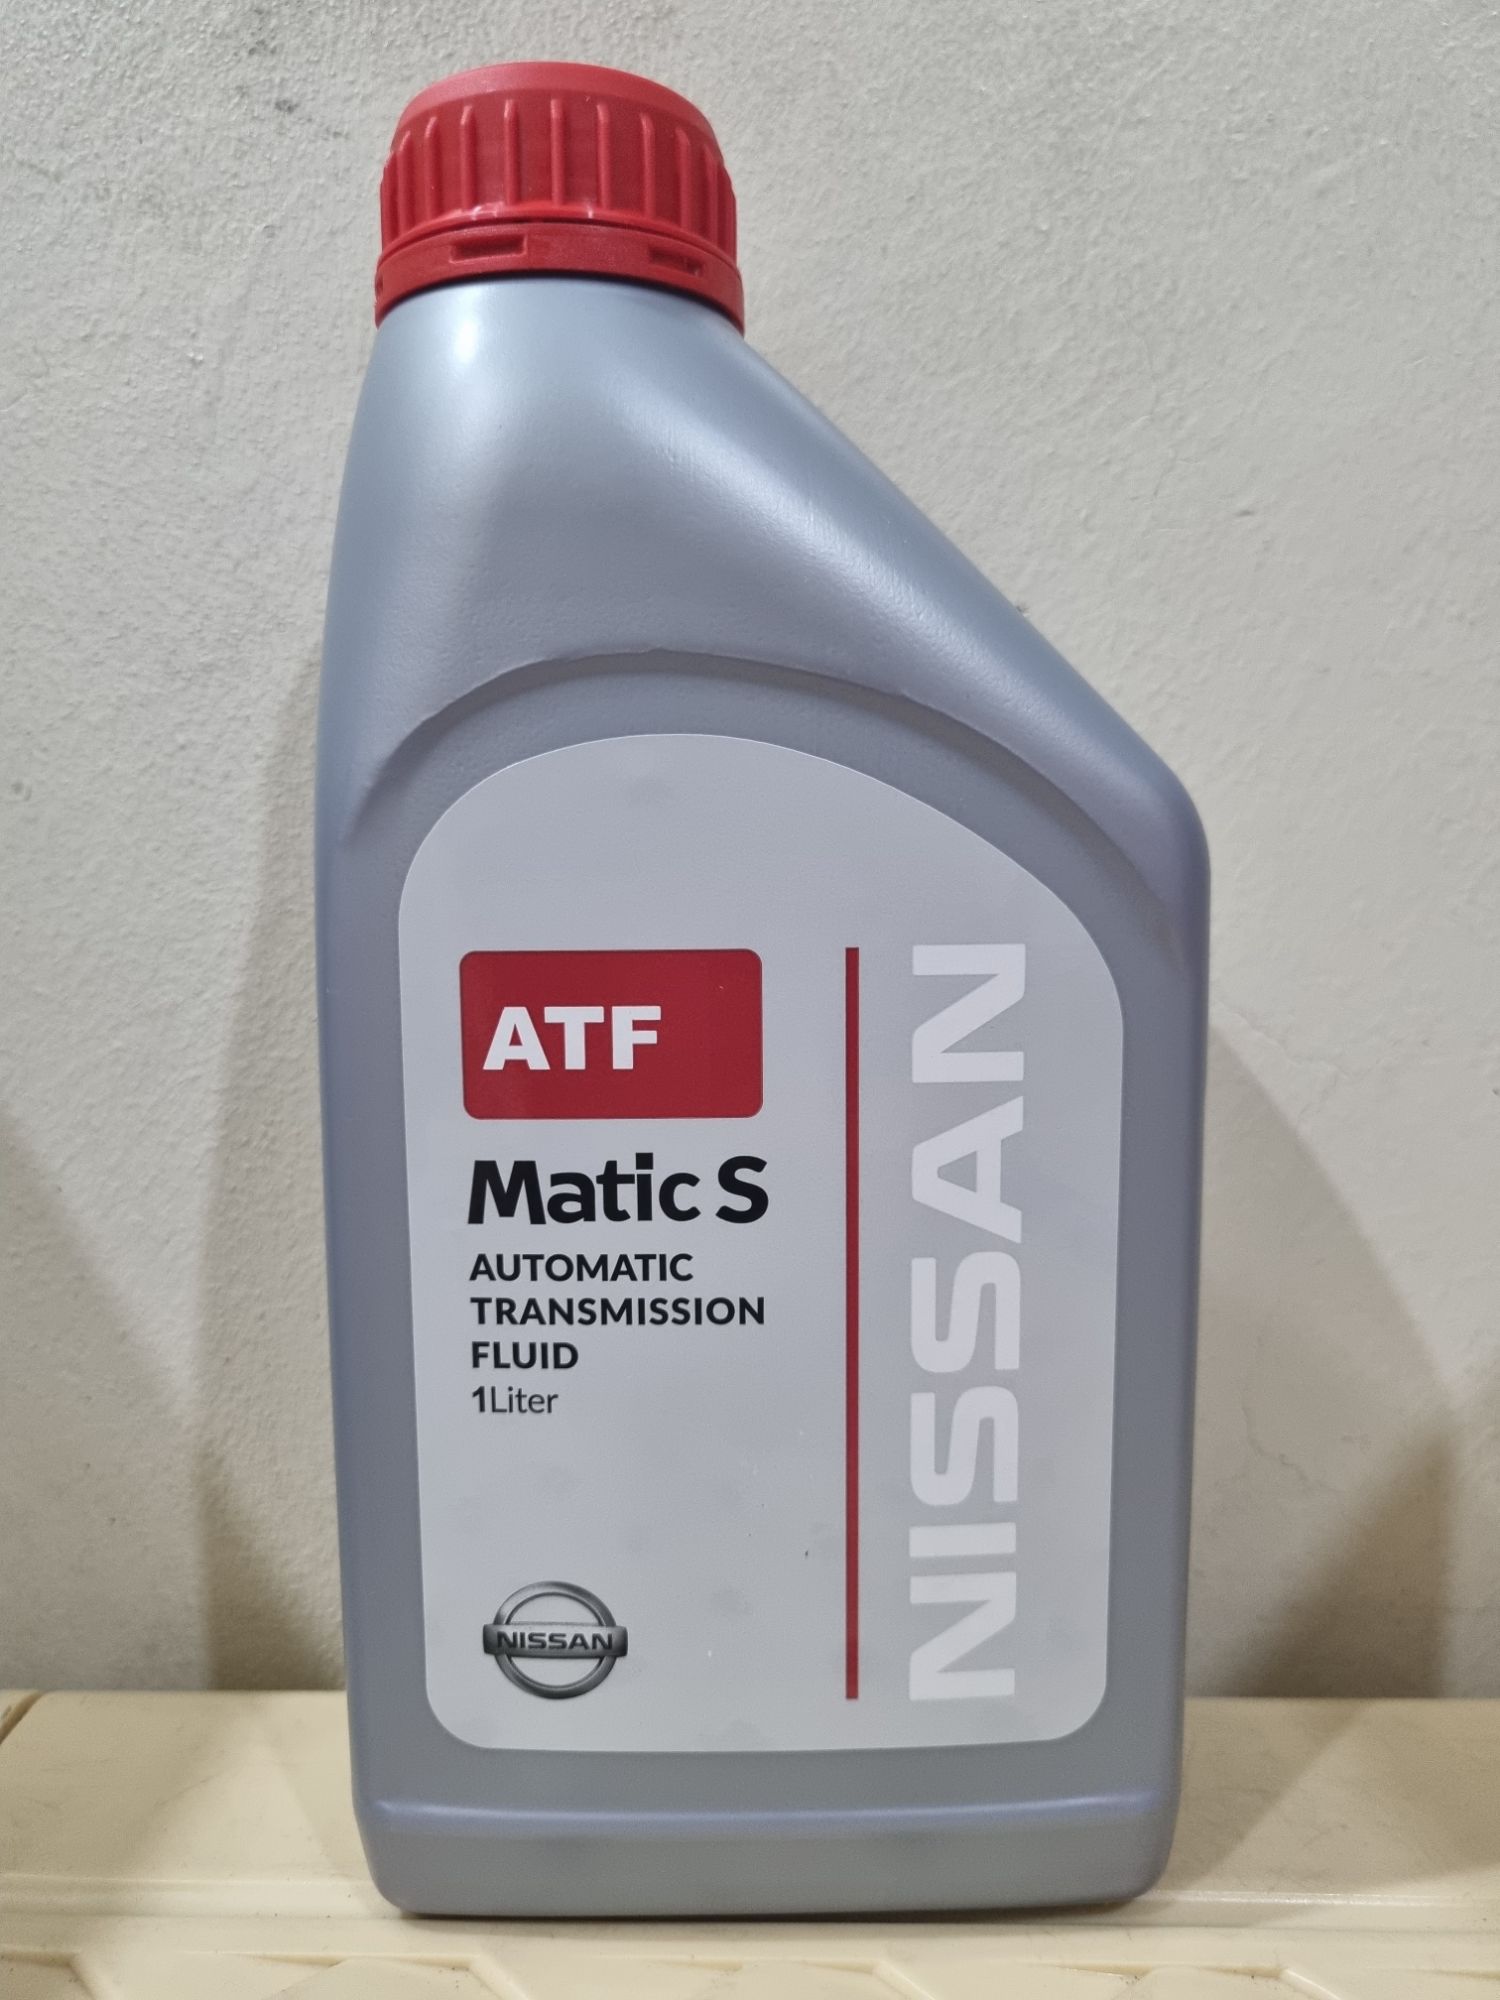 Nissan ATF matic-s. Nissan Automatic transmission Fluid matic-s. Ниссан матик j. АКПП Nissan matic d4 масло.